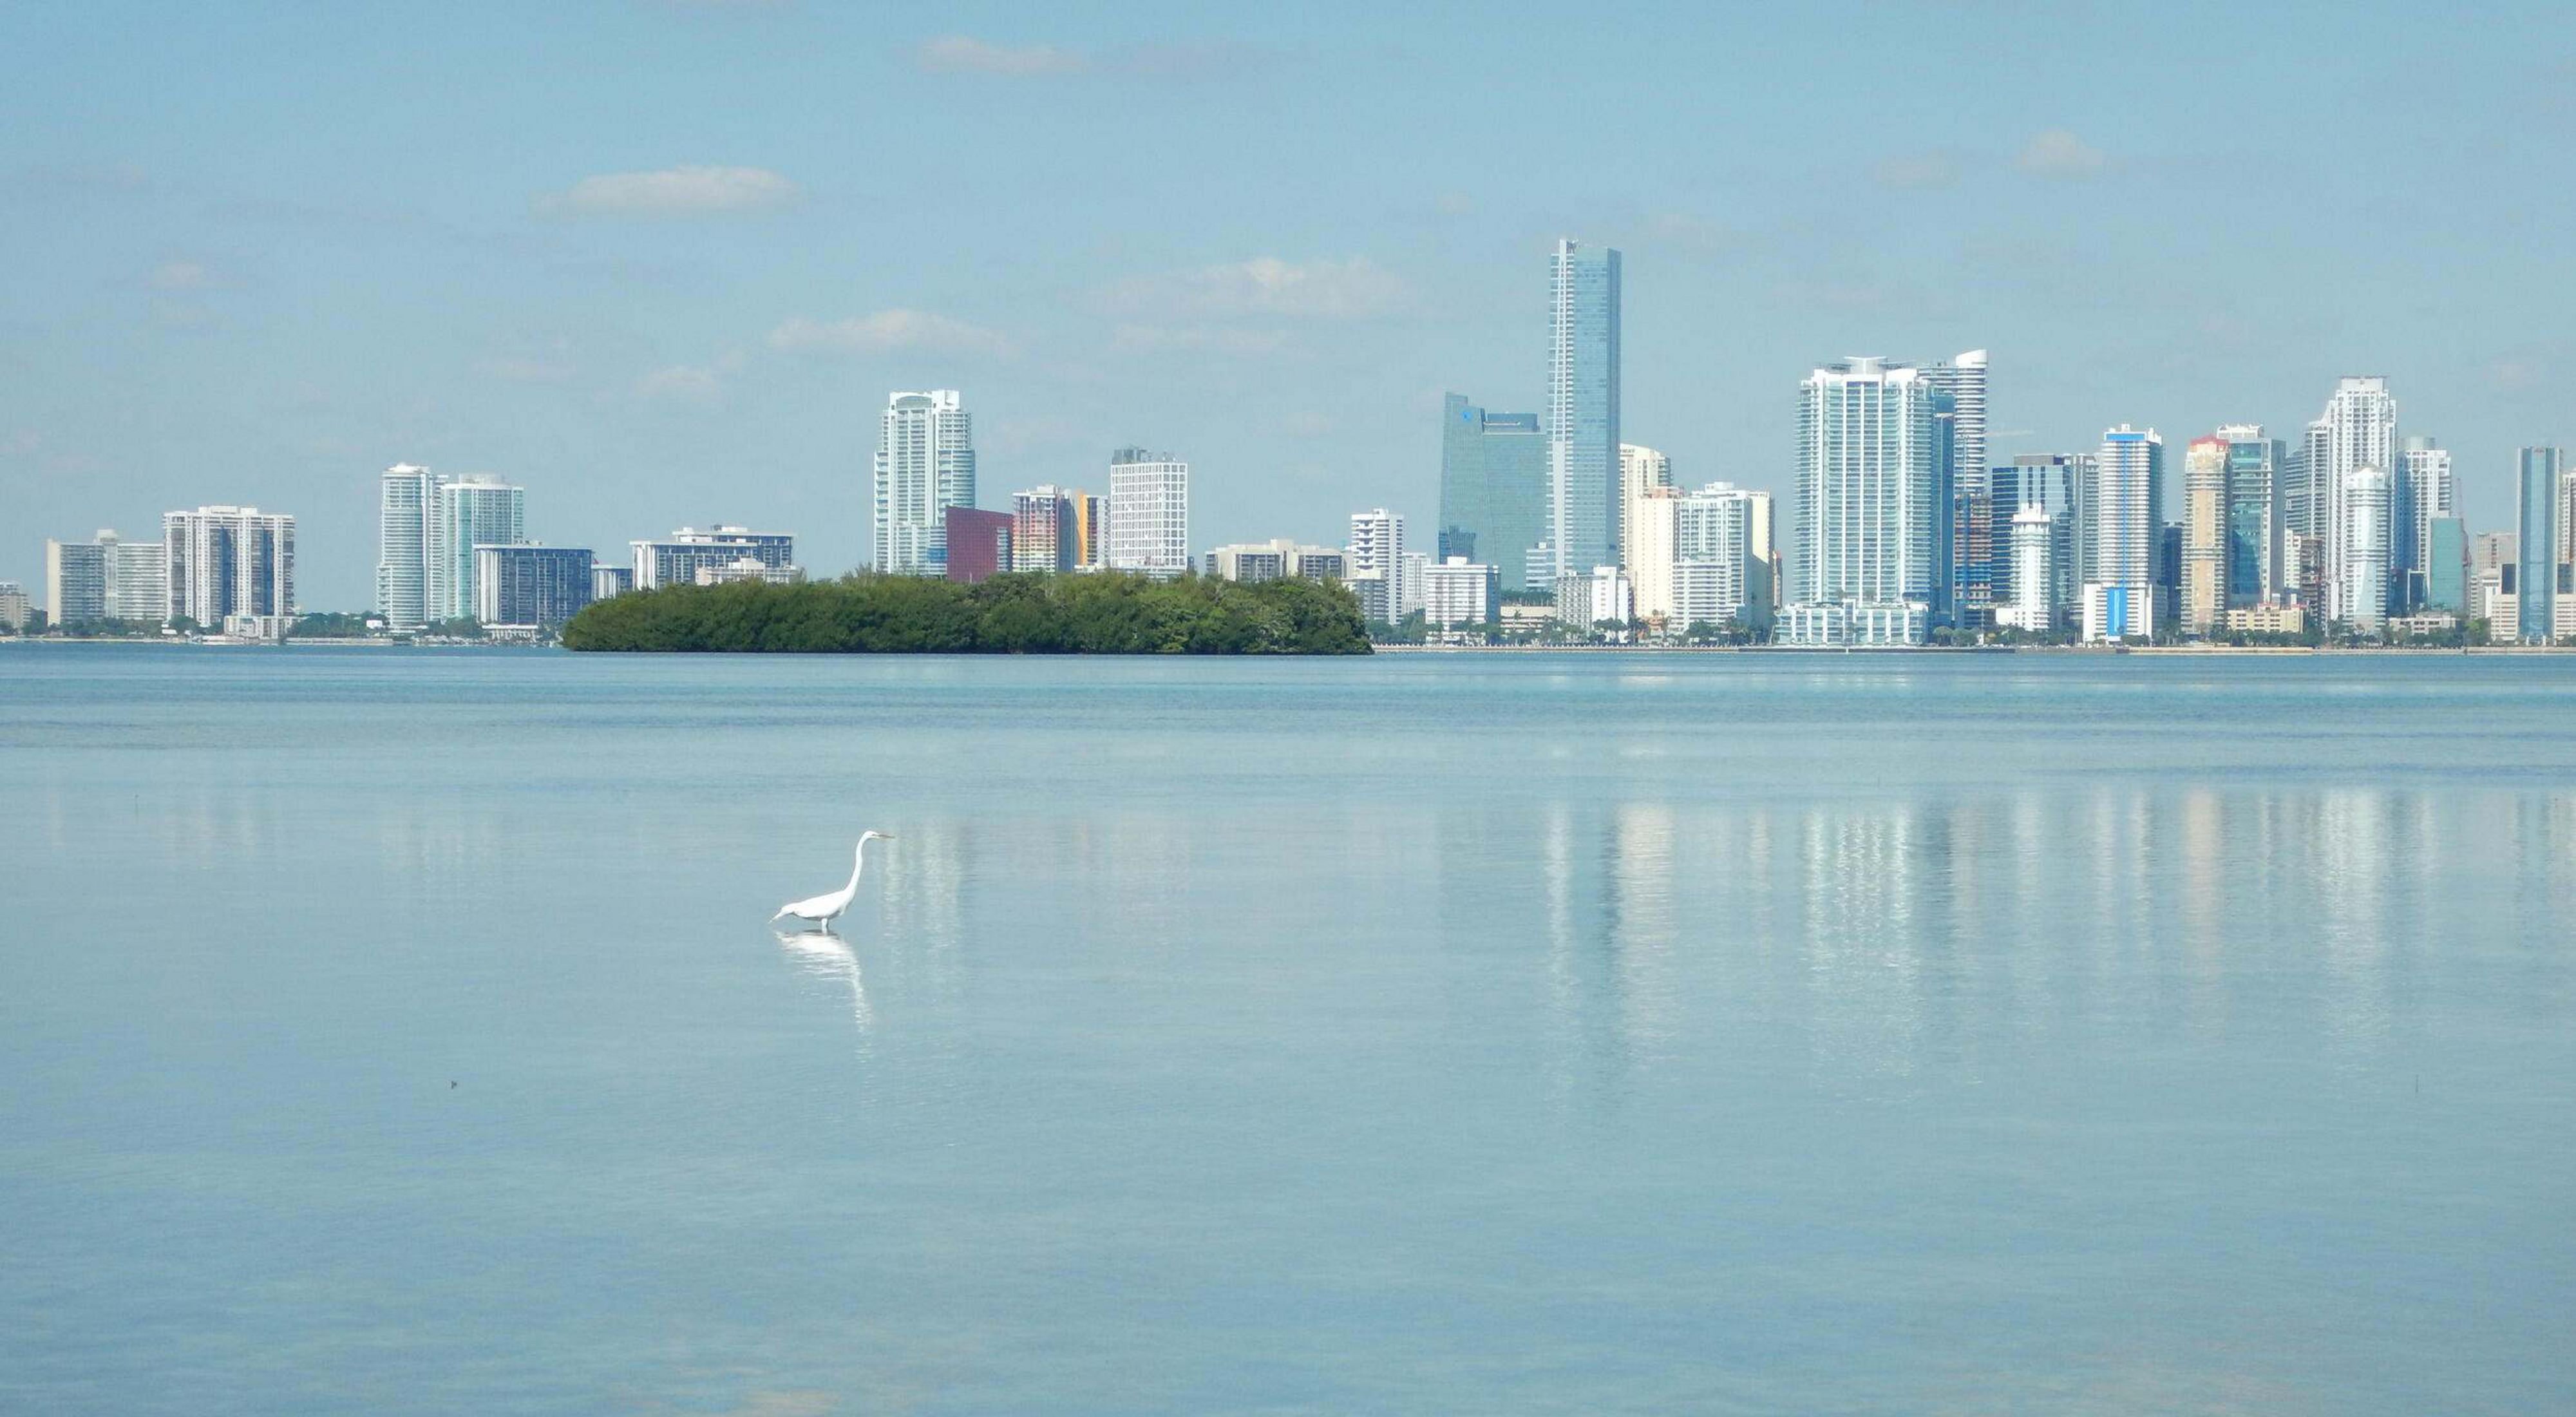 Bird in still waters of the bay with the skyline of Miami in the background.